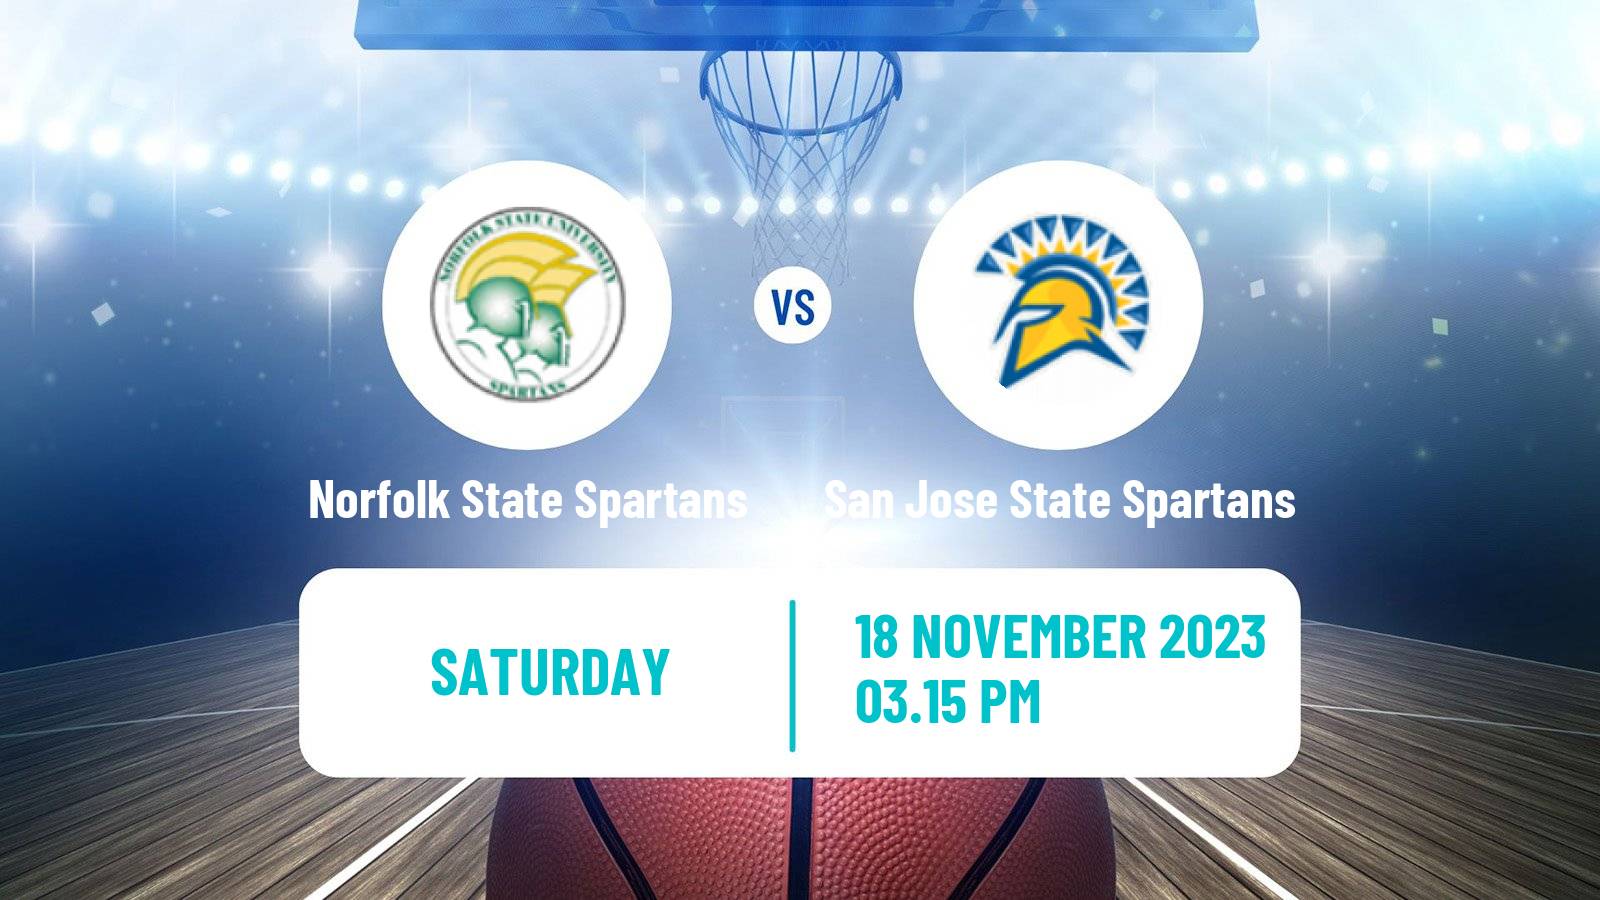 Basketball NCAA College Basketball Norfolk State Spartans - San Jose State Spartans